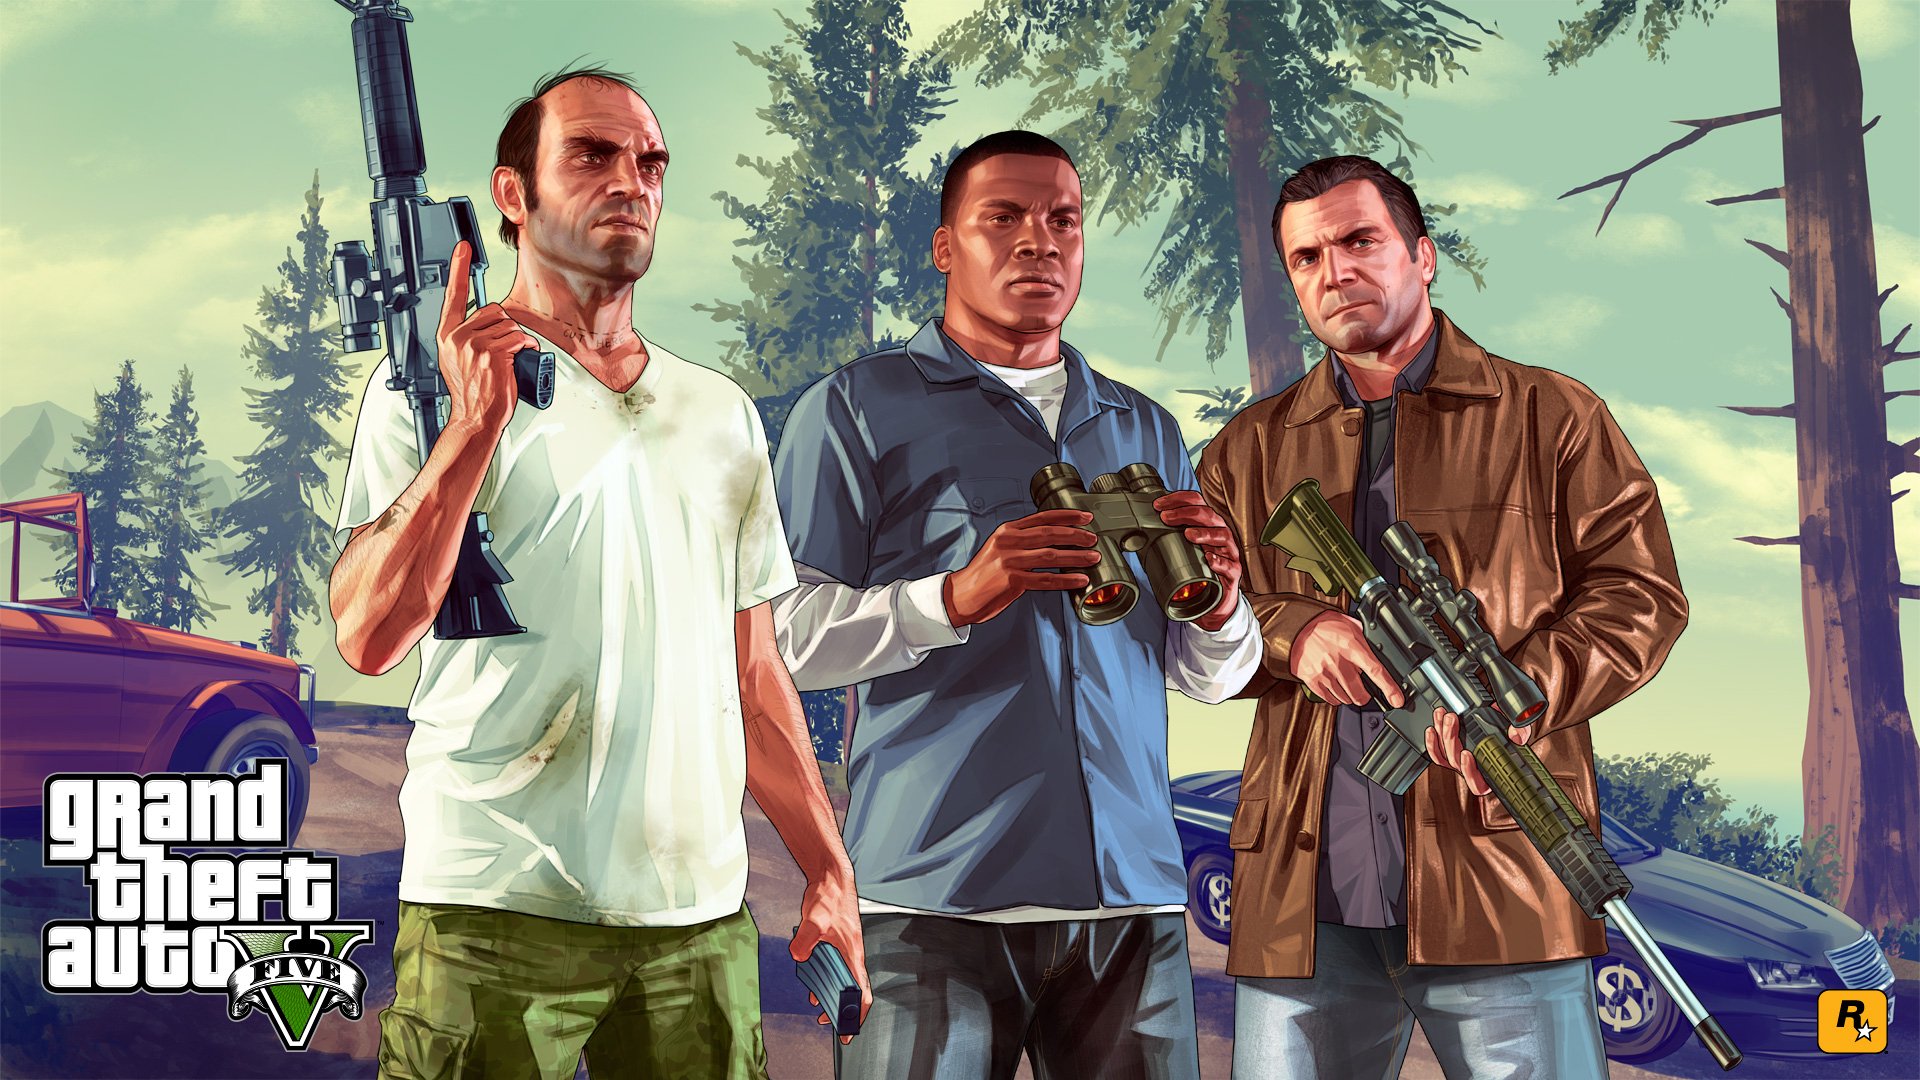 Epic Games Store Weekly Free Game: Grand Theft Auto V